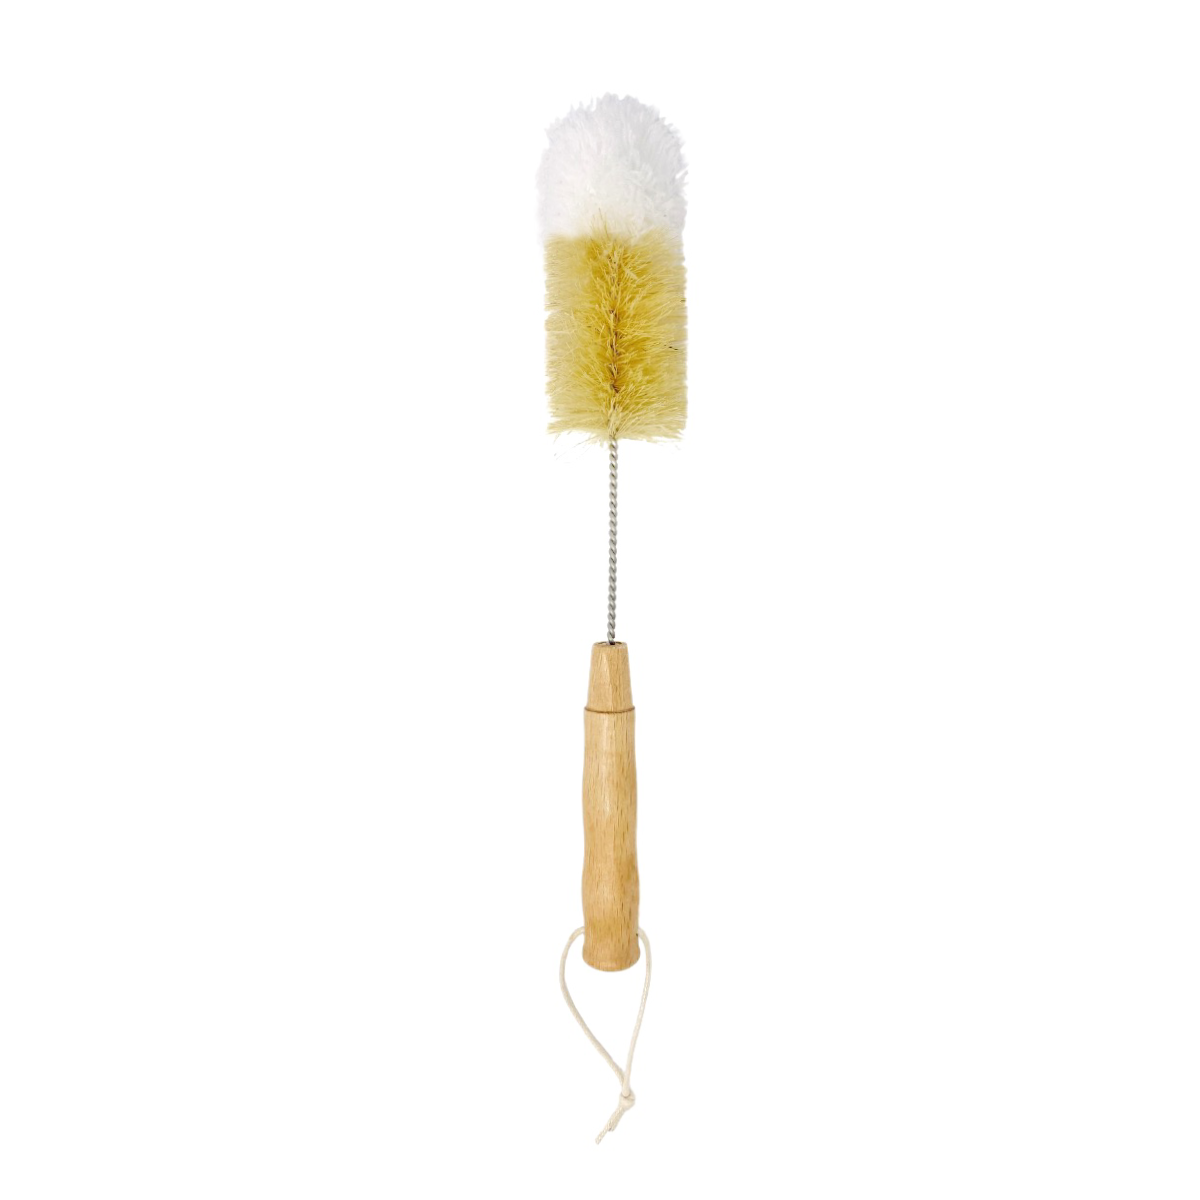 Mermaid Straw's drinkware cleaning brush, features a wood handle and loop to hang to dry